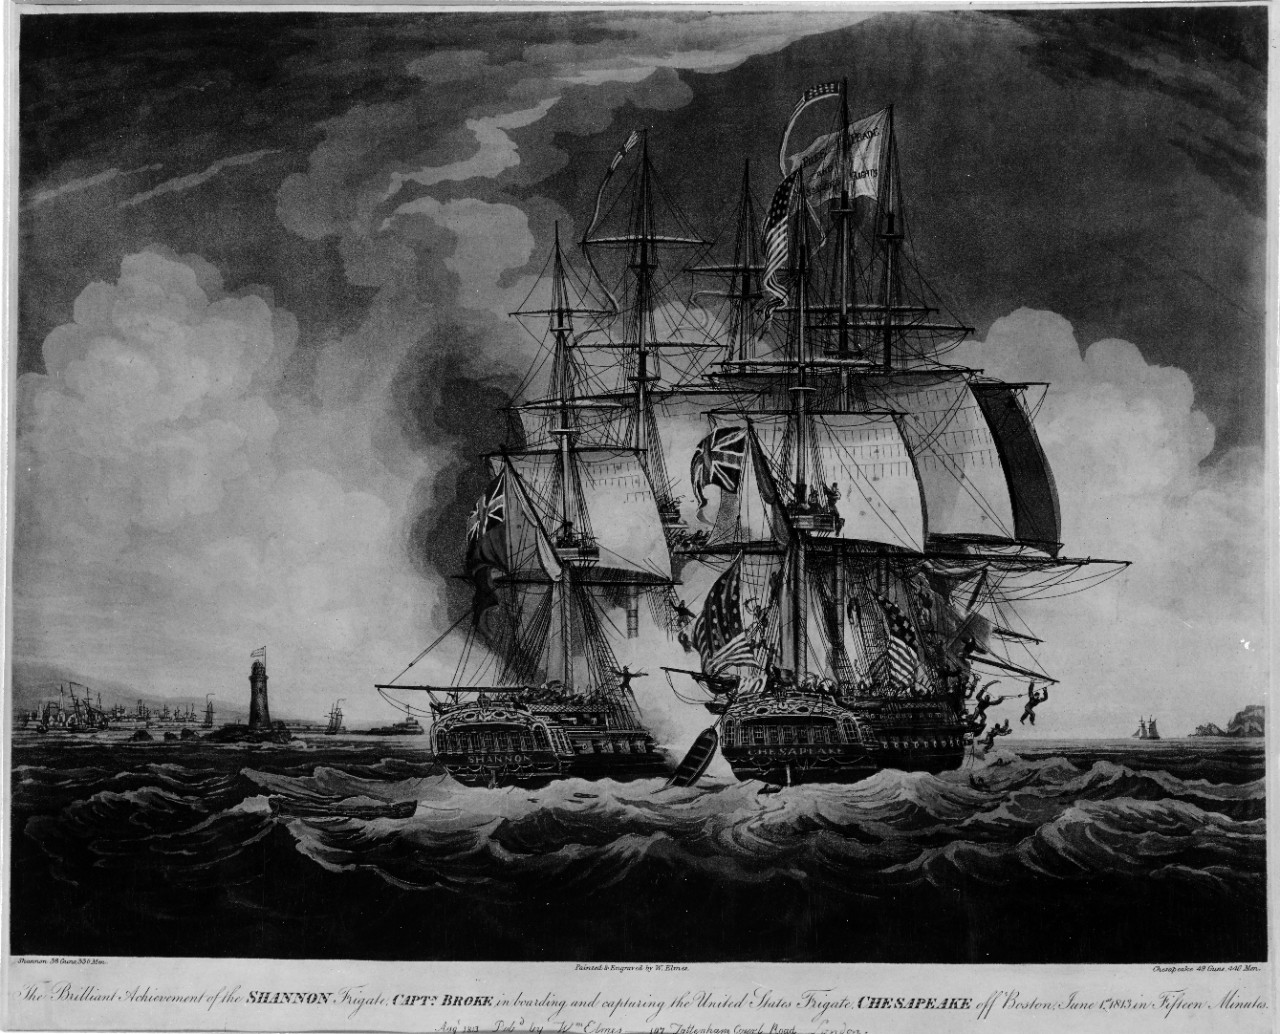 Photo #: NH 42906  Engagement between USS Chesapeake and HMS Shannon, 1 June 1813